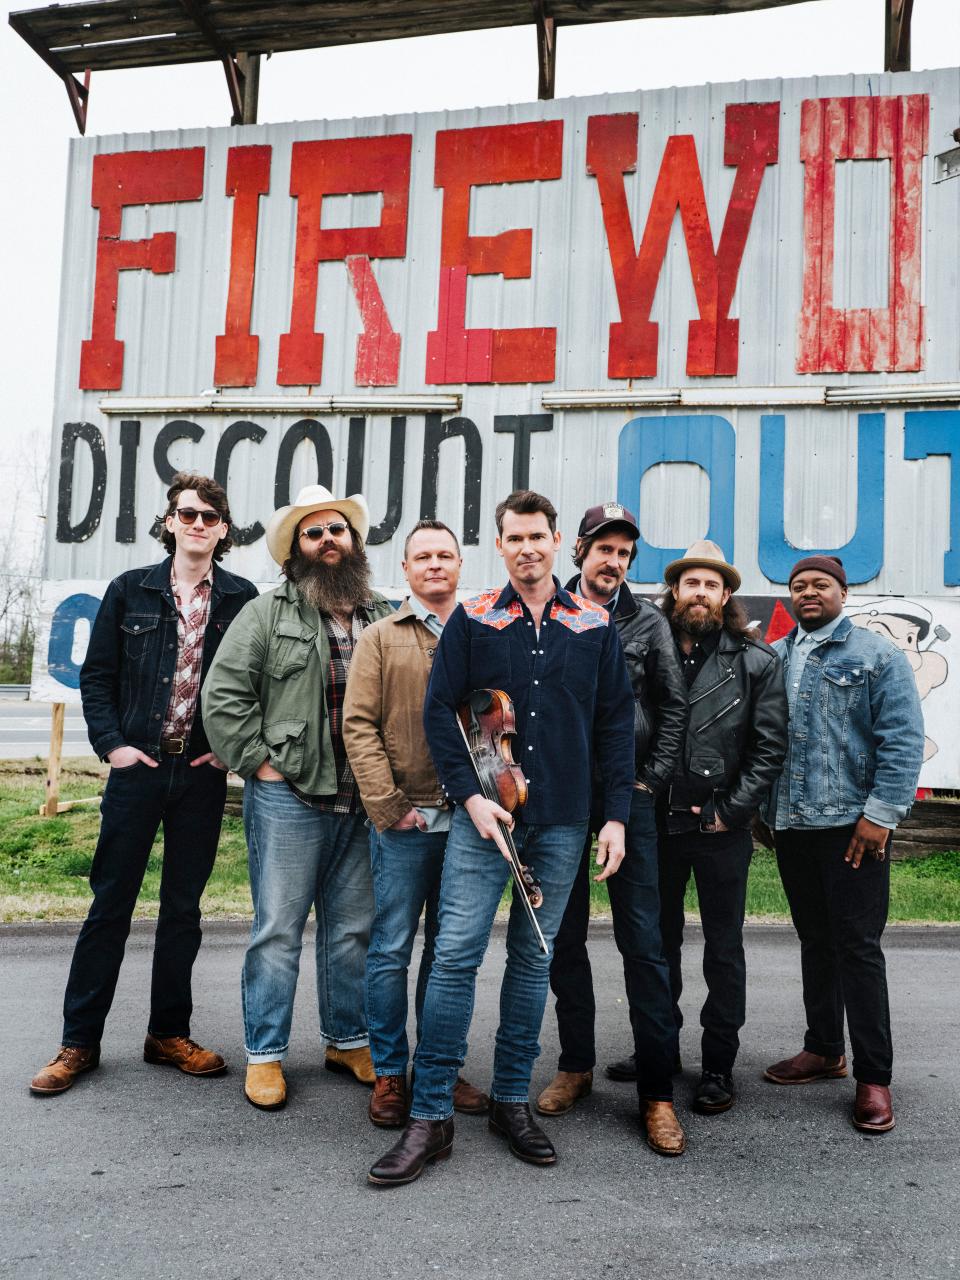 Old Crow Medicine Show is back on the road, touring with Hank Williams Jr.